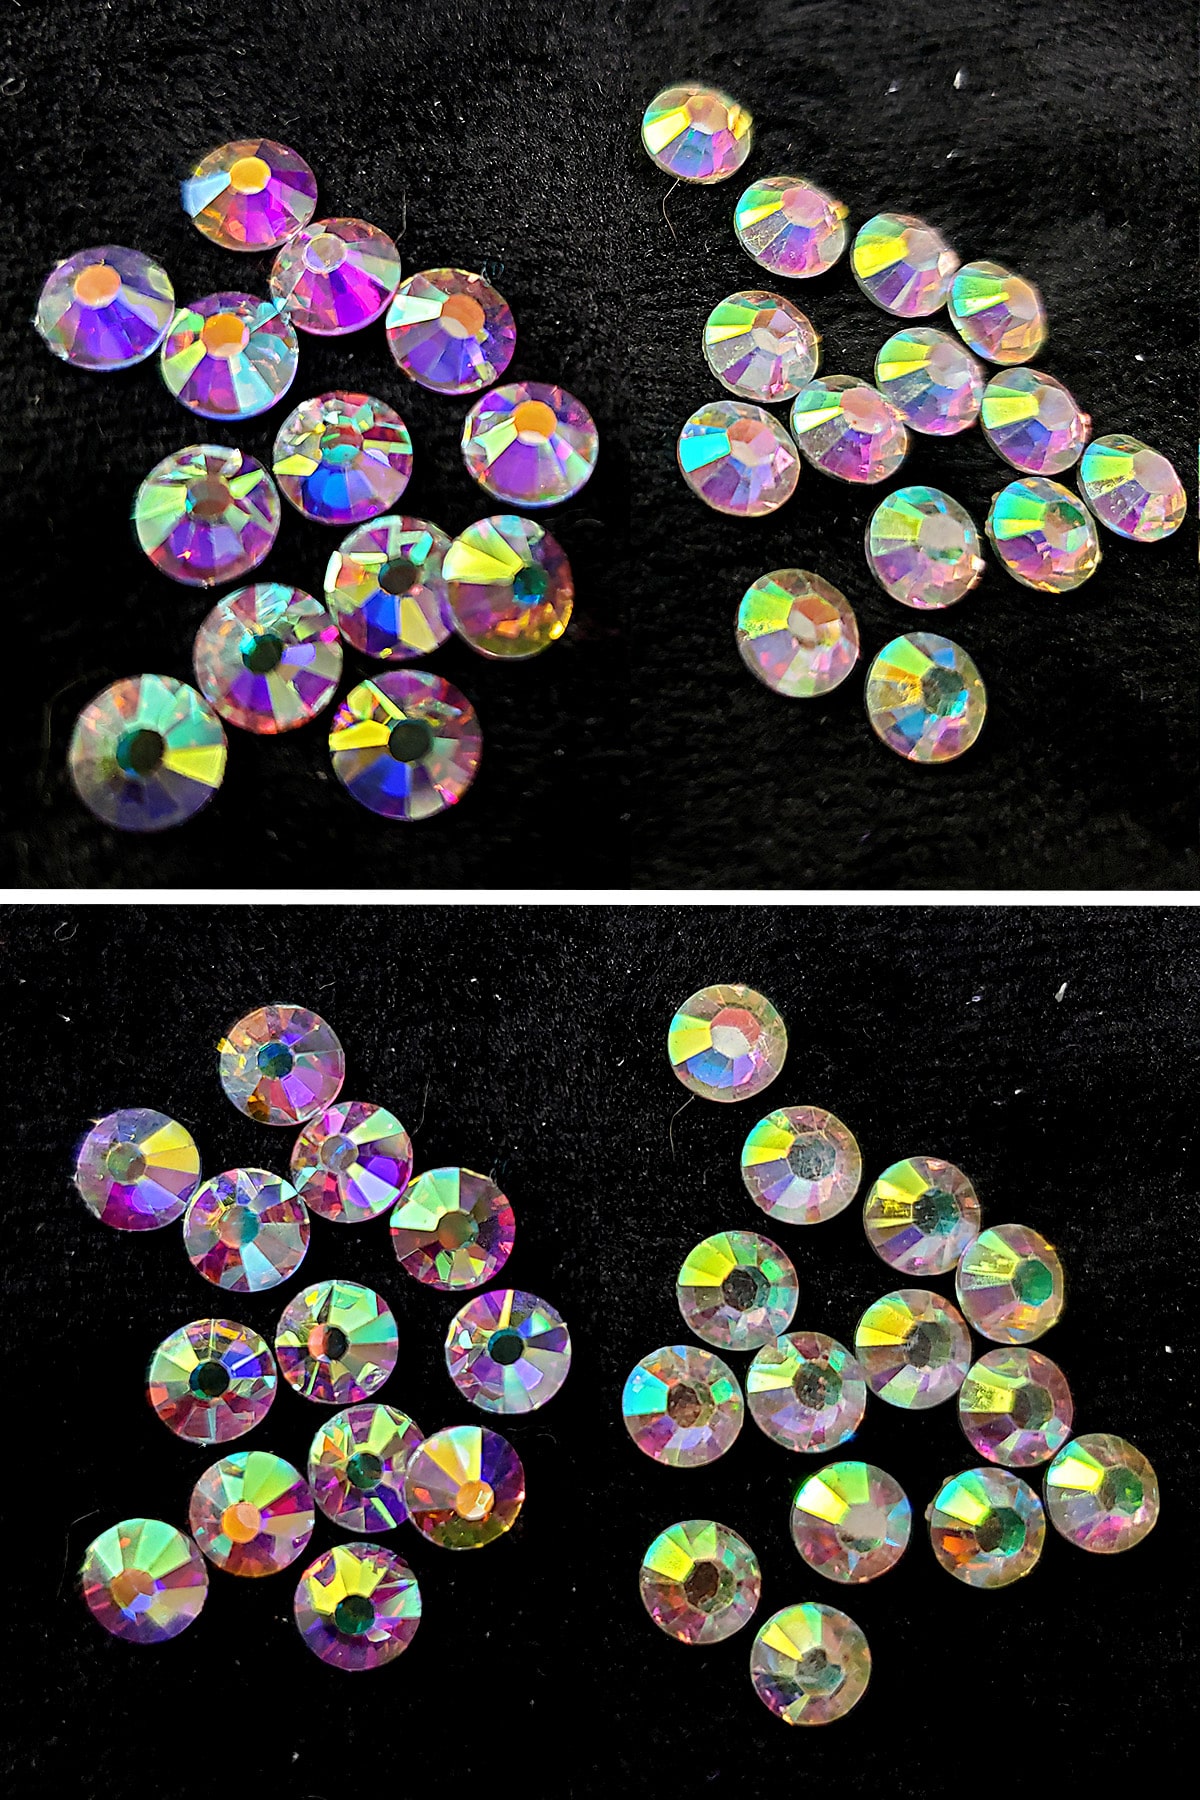 A two part compilation image shows different views of AB finish rhinestones.